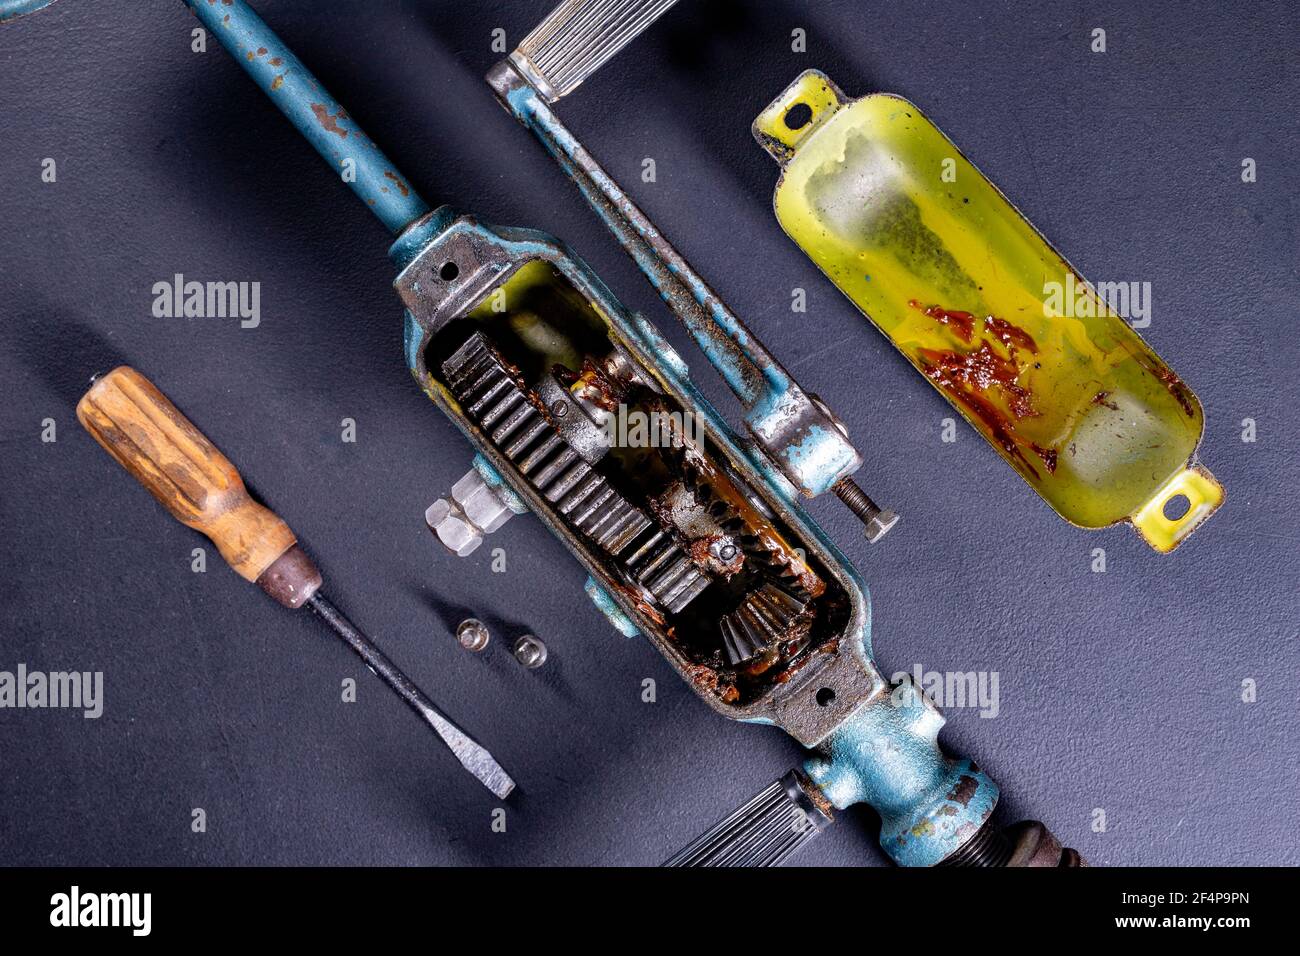 The cover was removed from the gearbox in an old hand drill. Servicing of tools for work in a carpentry workshop. Dark background. Stock Photo